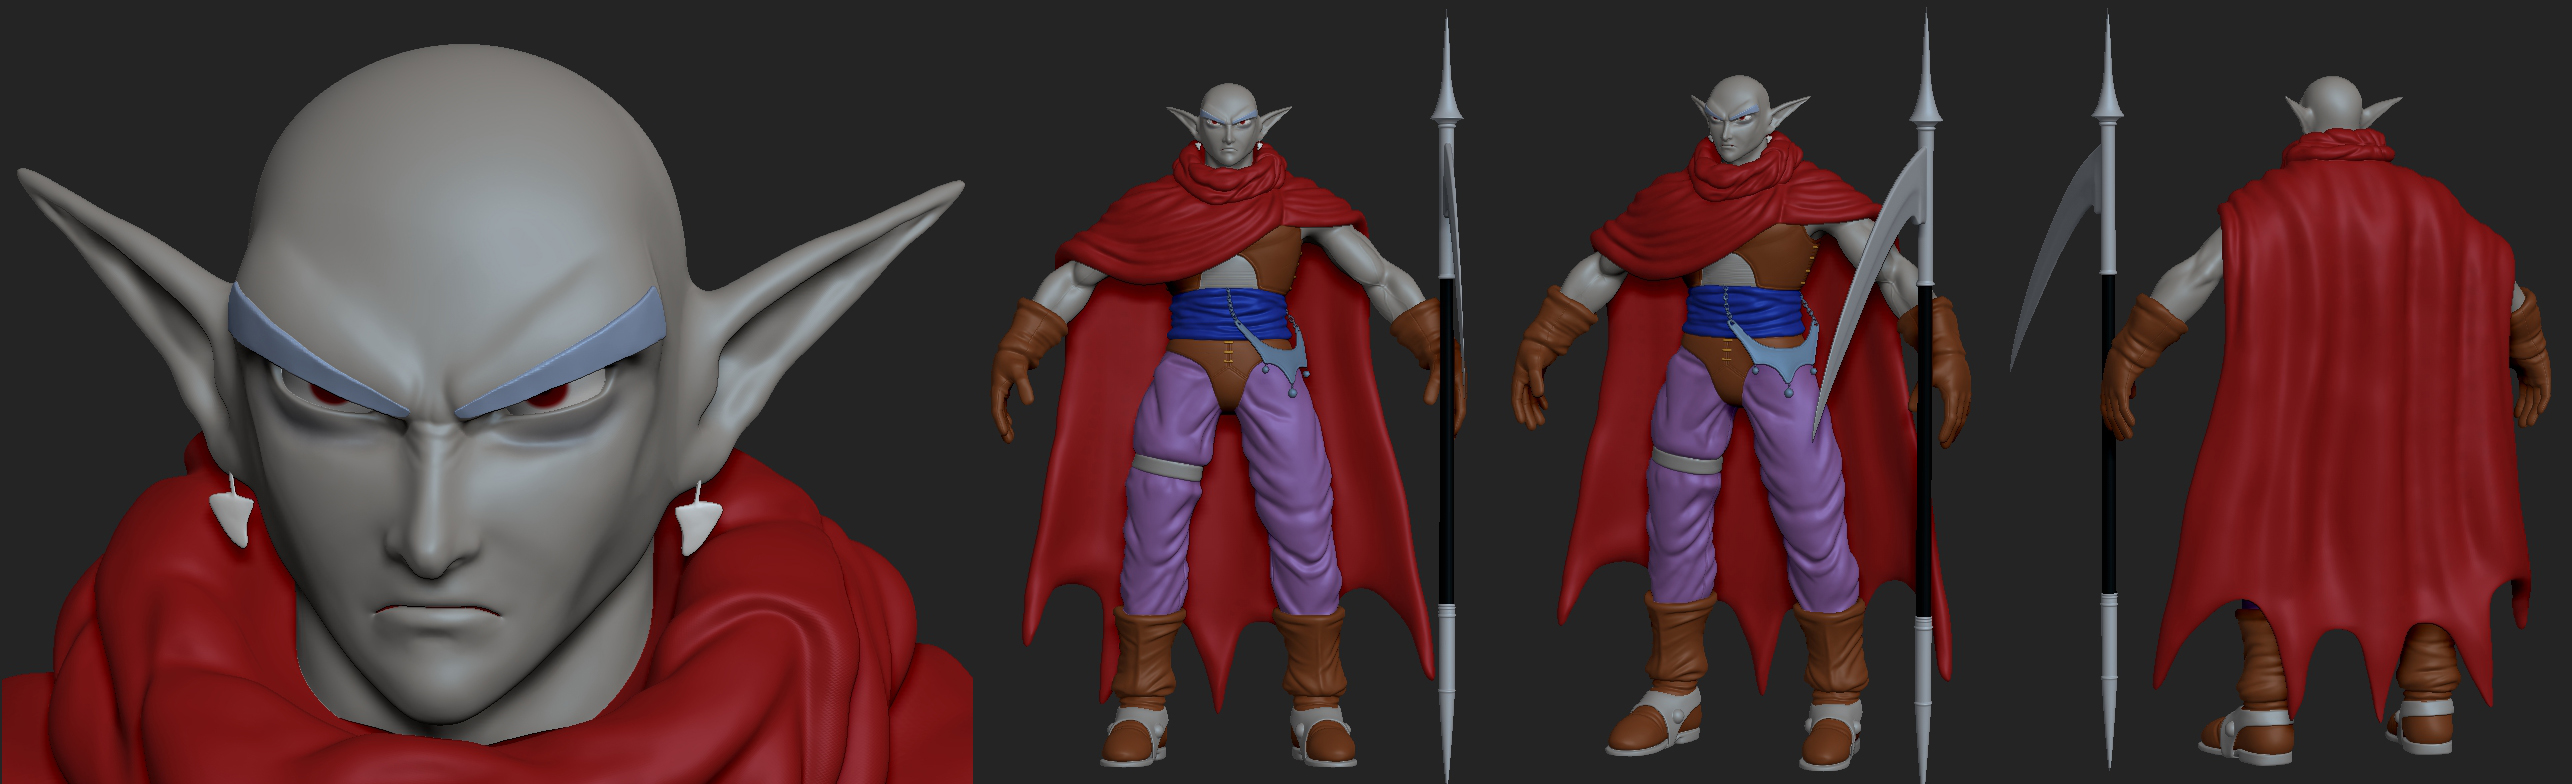 magus_wip05_by_theartistictiger-d9e2ykj.jpg